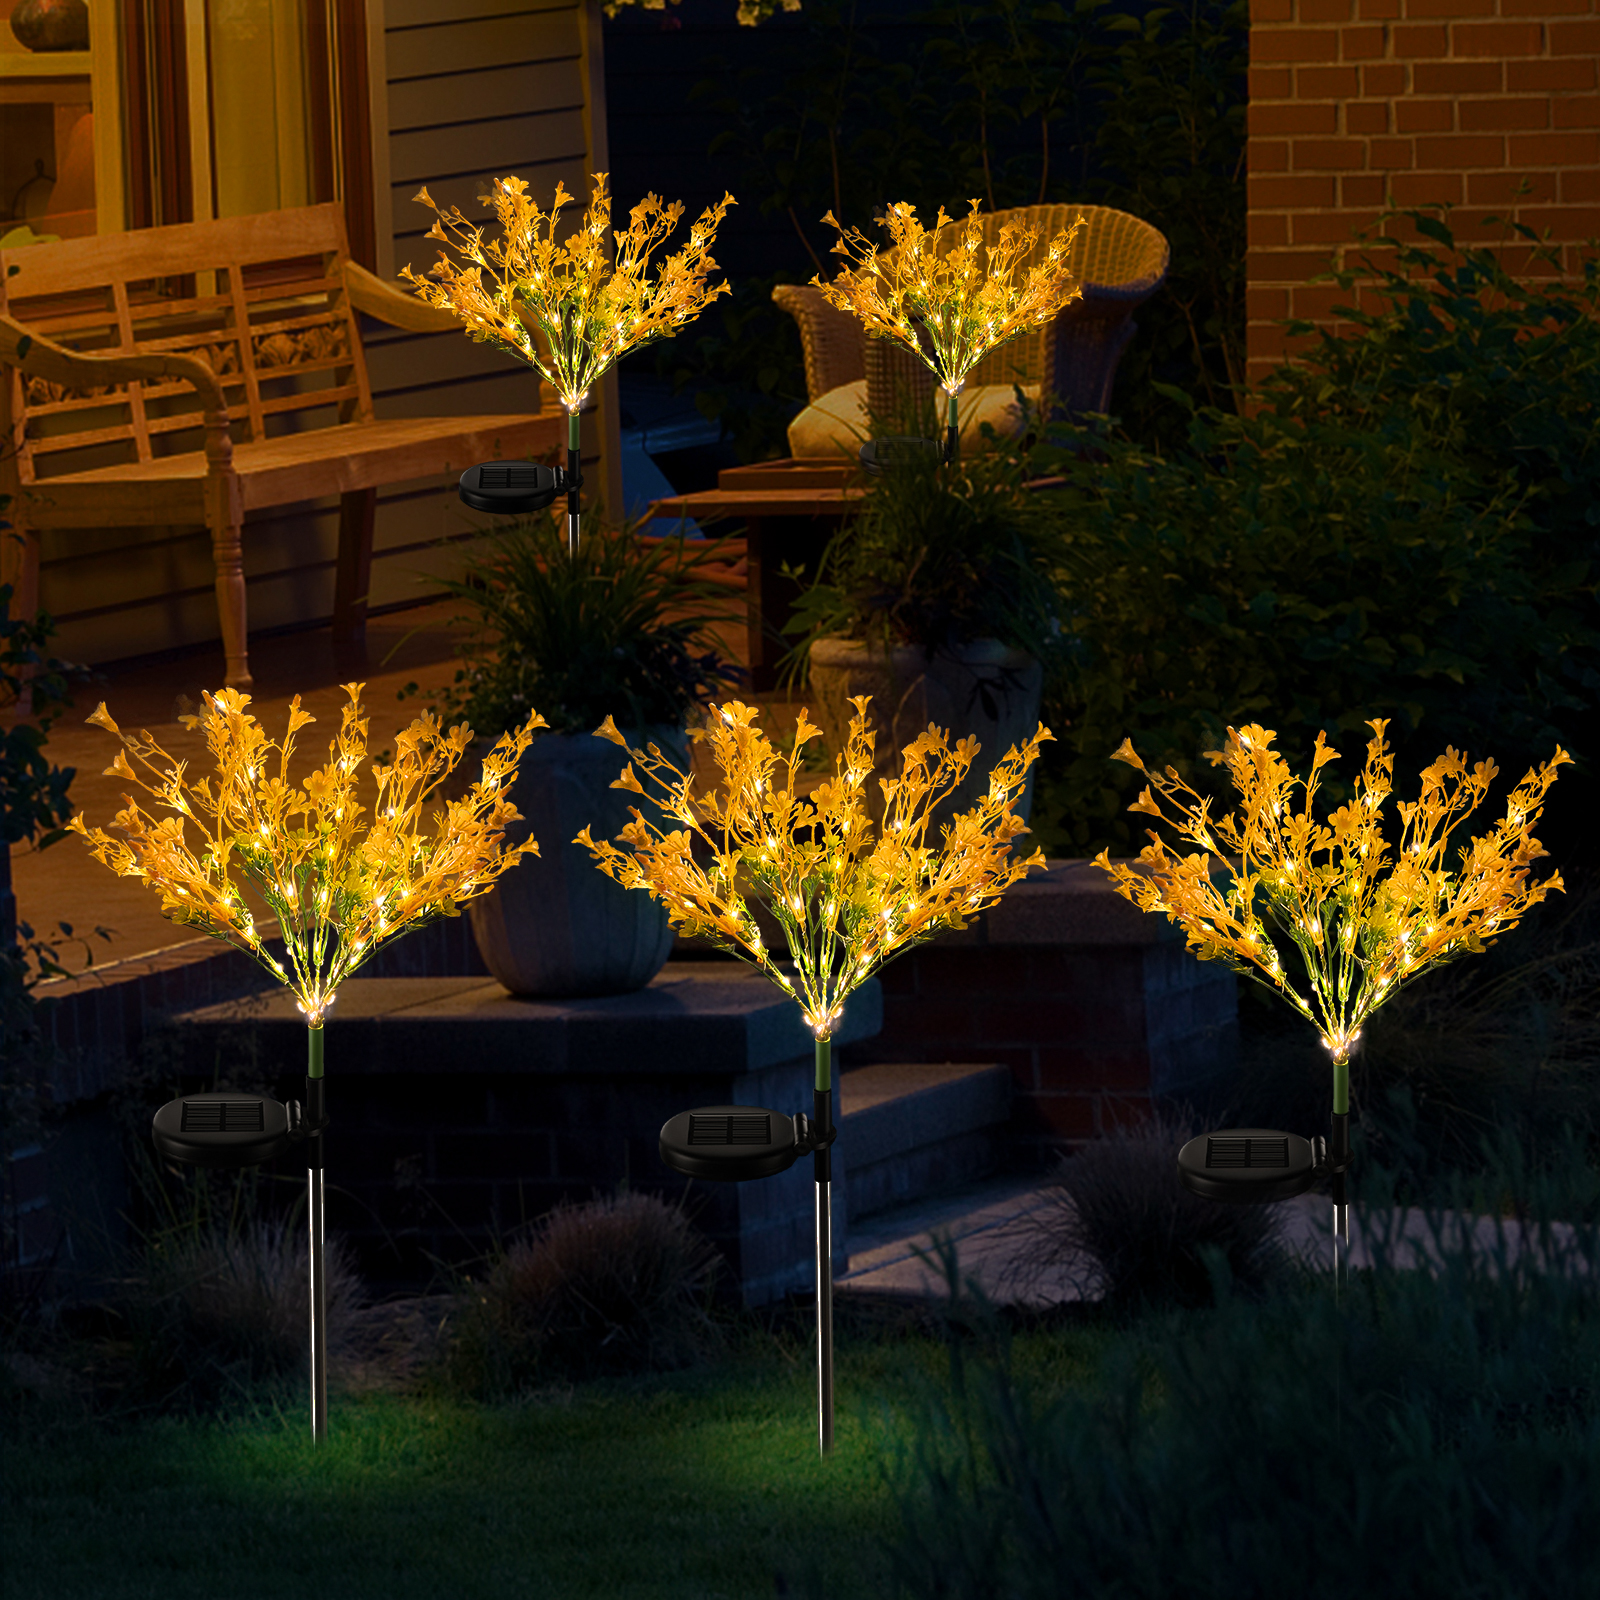 2 Pcs Solar Garden Lights for Outdoor Decorative, Solar Flowers Lights from Dusk to Dawn, Solar Garden Stake Lights Waterproof IP65, Solar Powered Flower Lights for Patio, Garden, Yard, Lawn, Pathway - image 5 of 9